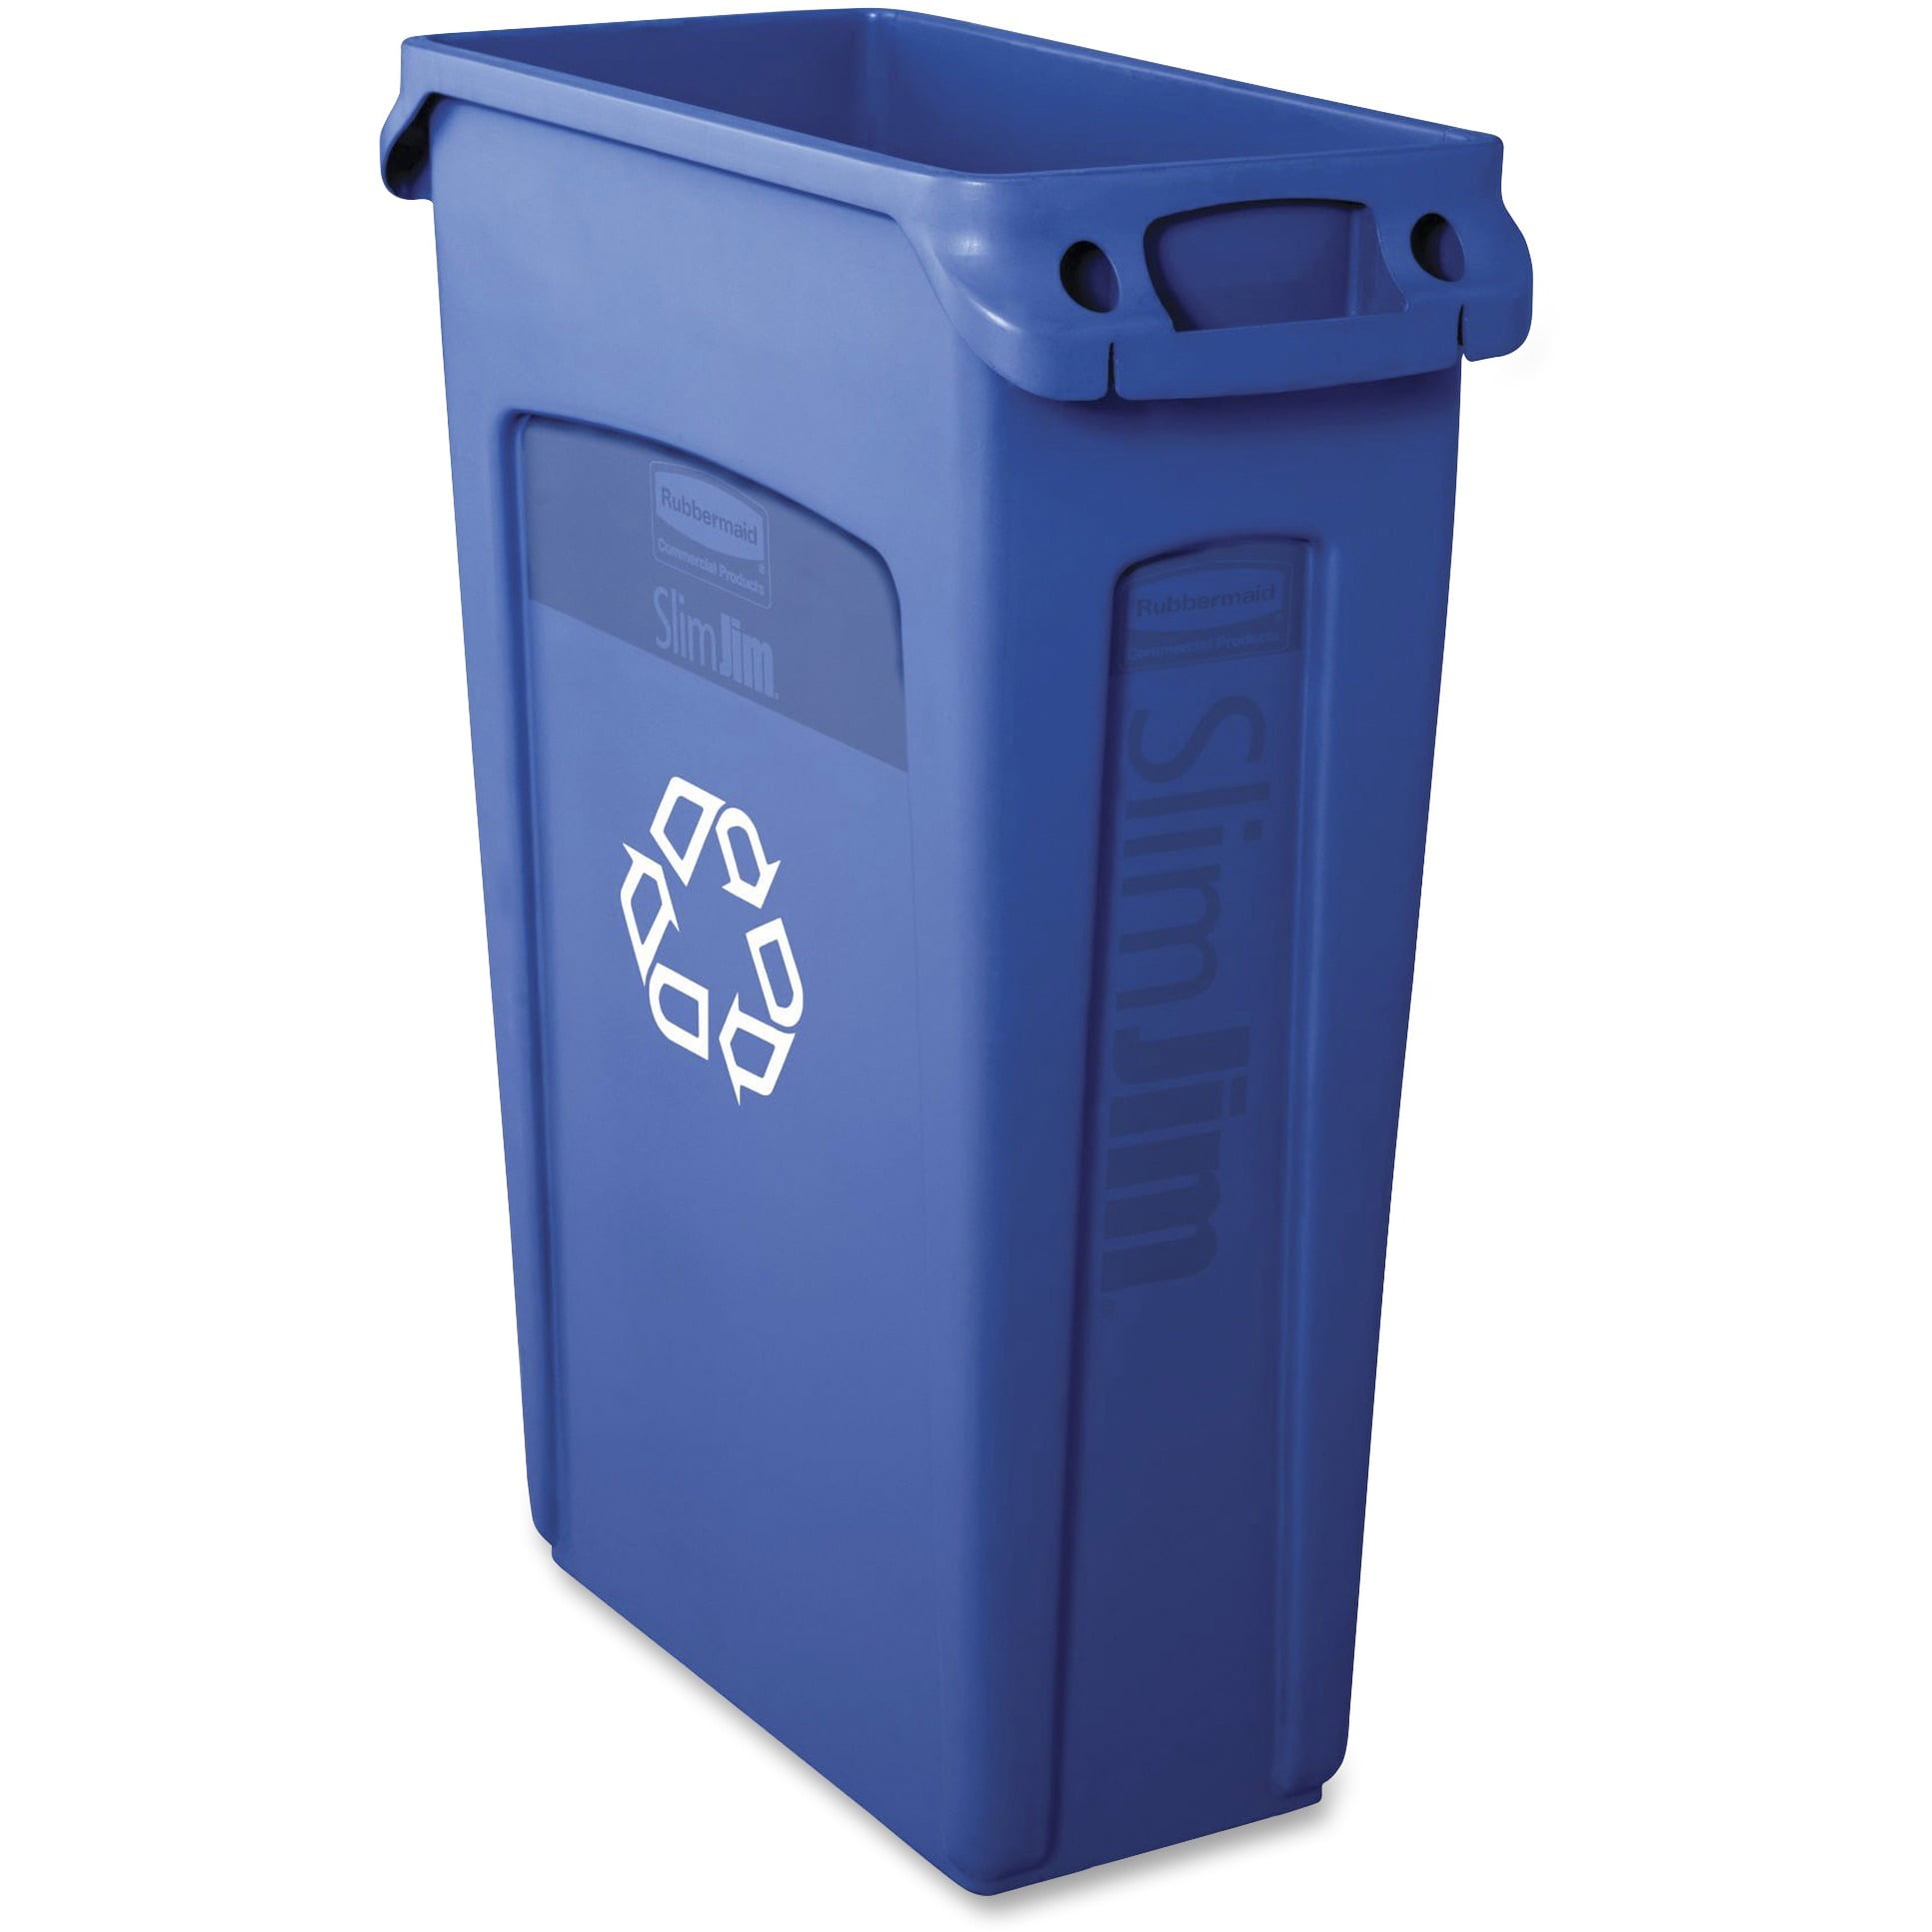 Rubbermaid Commercial Lid Insert Closed for Slim Jim Recycling Stations Blue NEW 